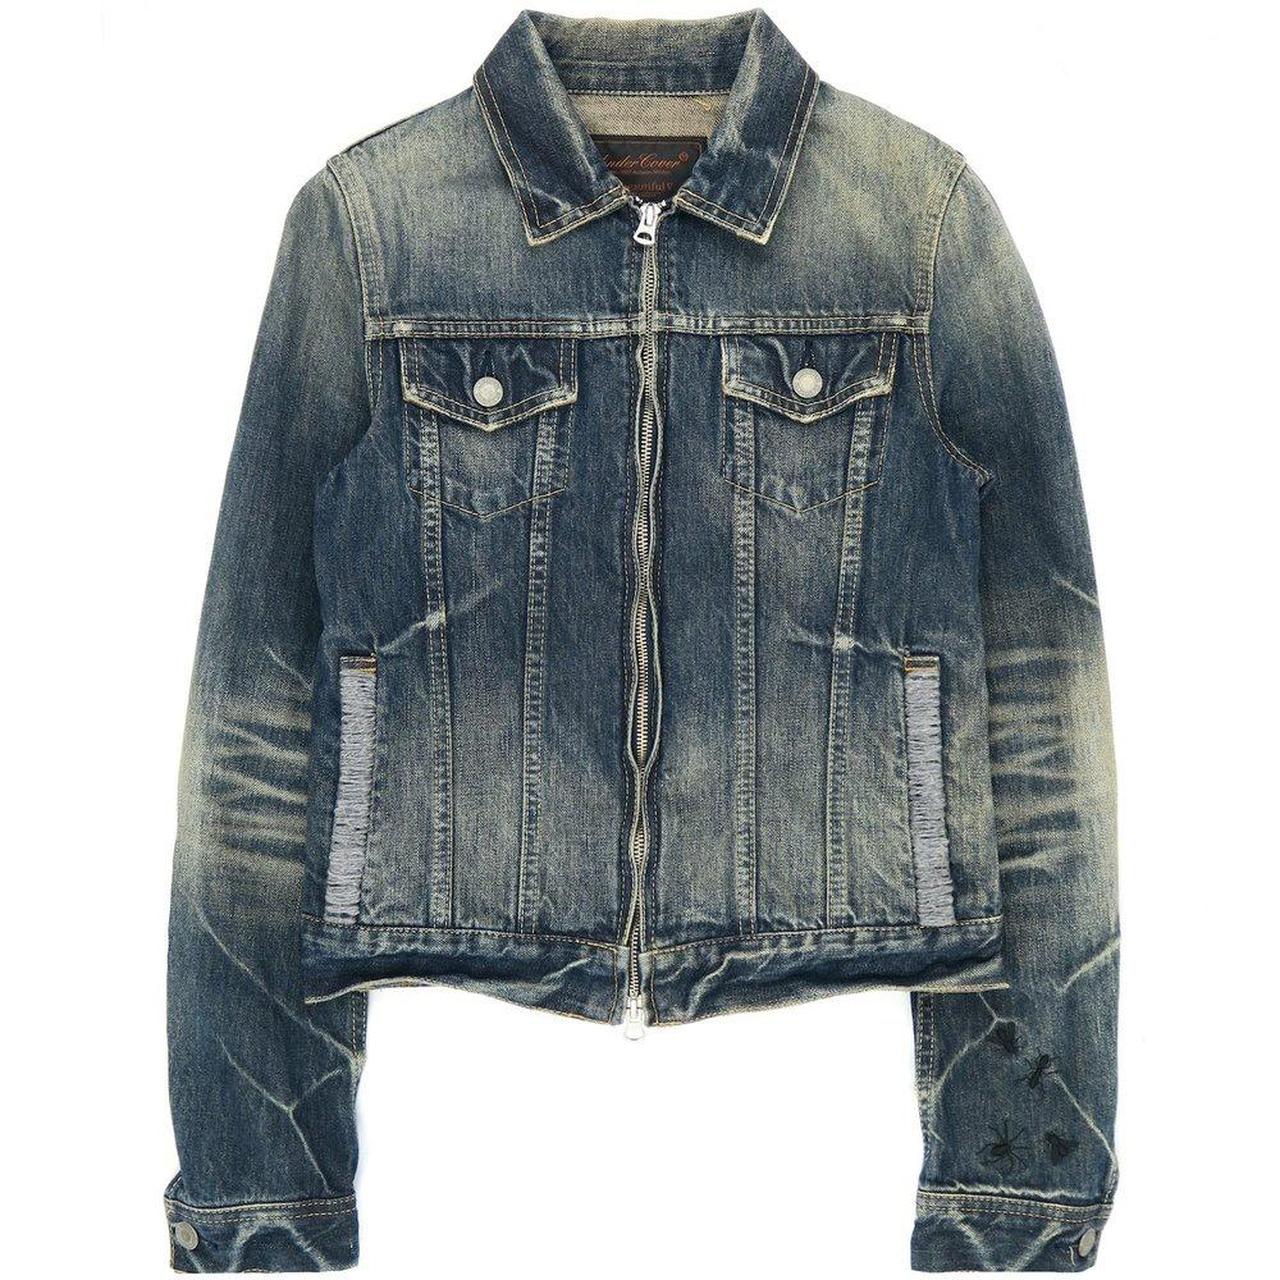 Undercover Bug/Insect/Apple Denim Jacket AW06 BBV